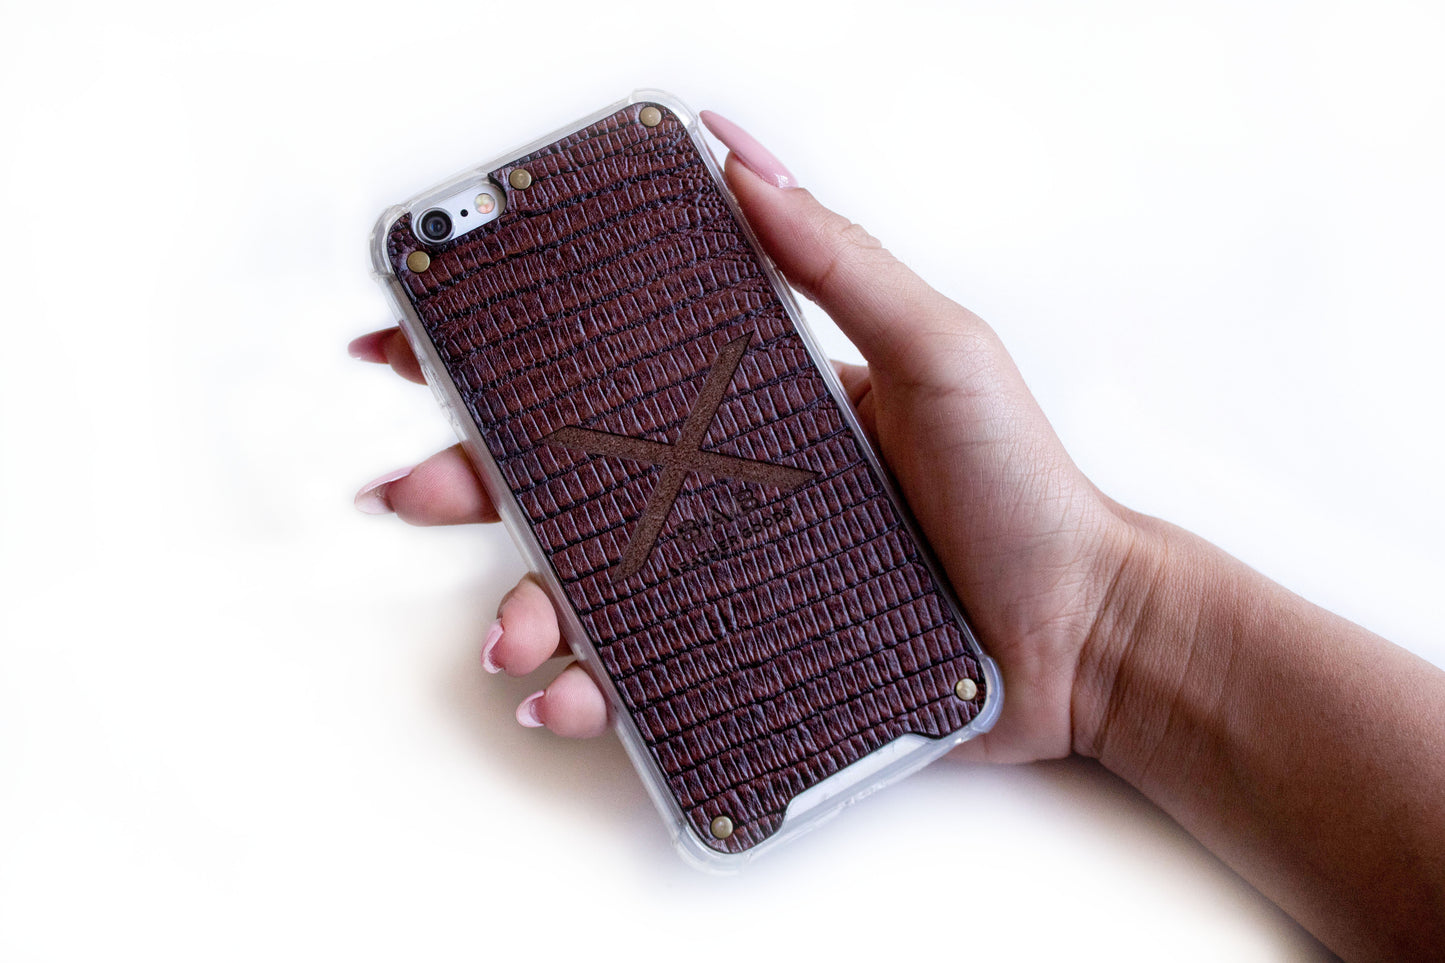 Textured Brown Lizard Patent Genuine Leather iPhone Case cut and laser engraved, 5 Bronze Rivets.- F36